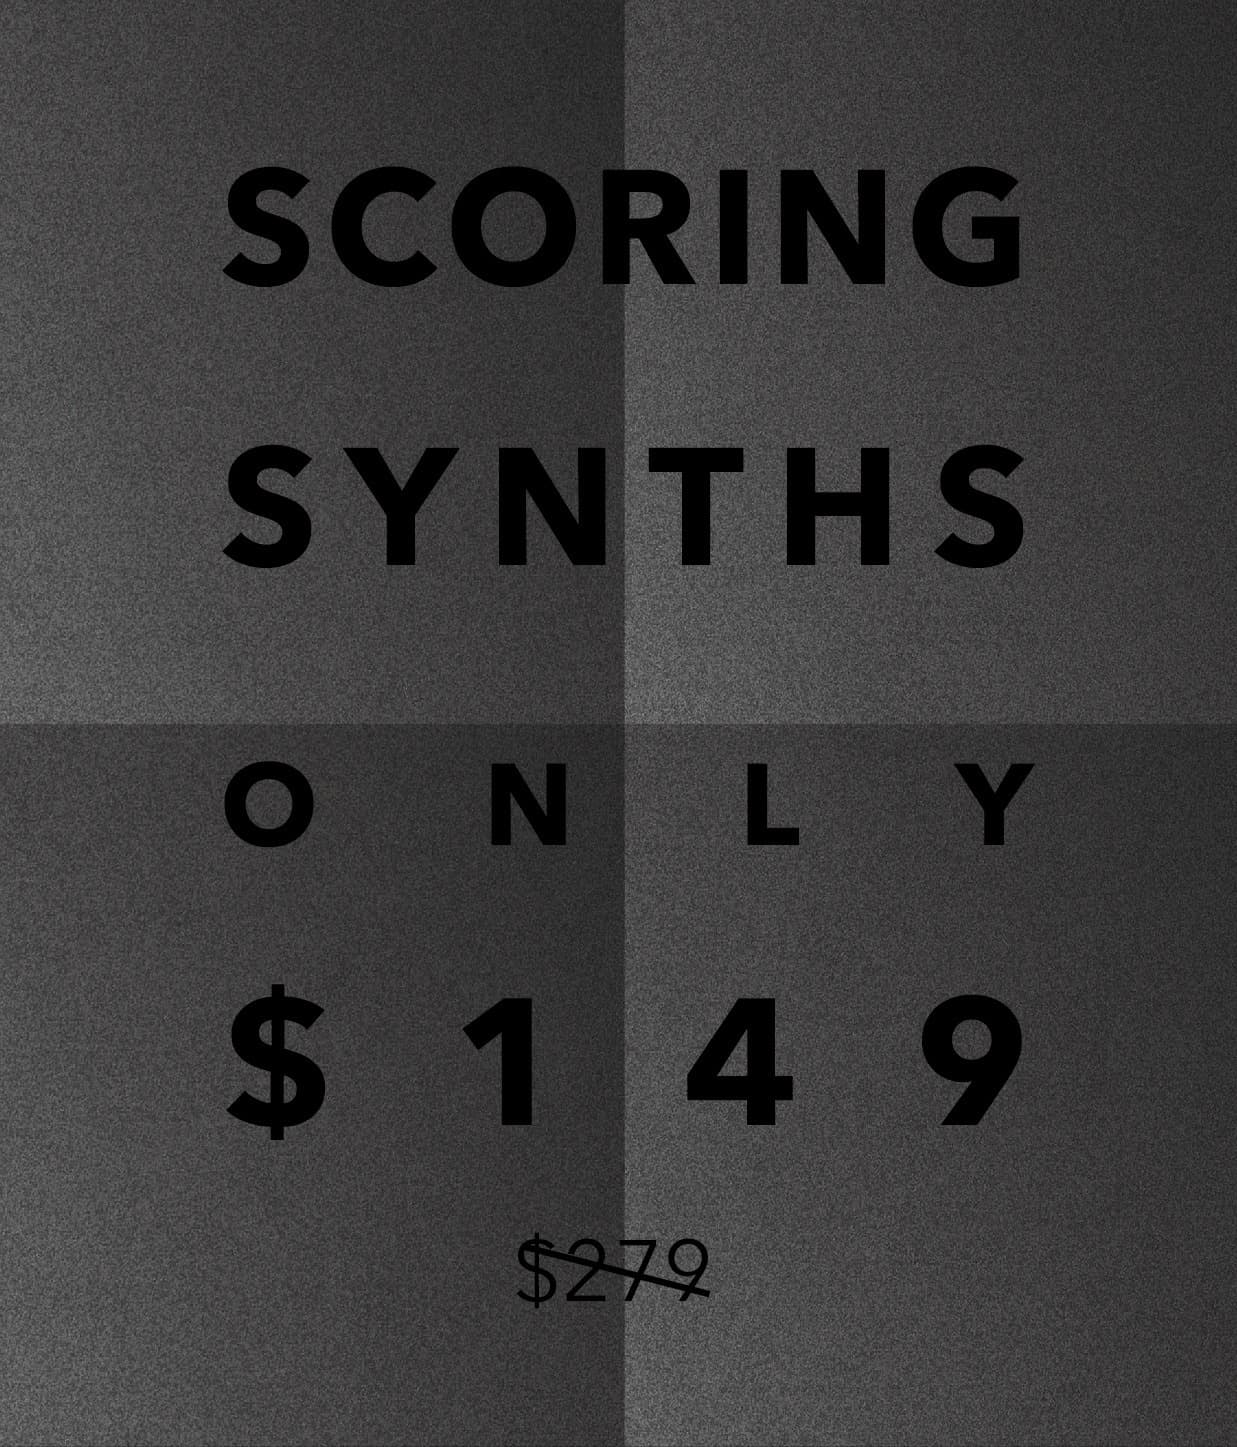 Scoring Synths is on sale